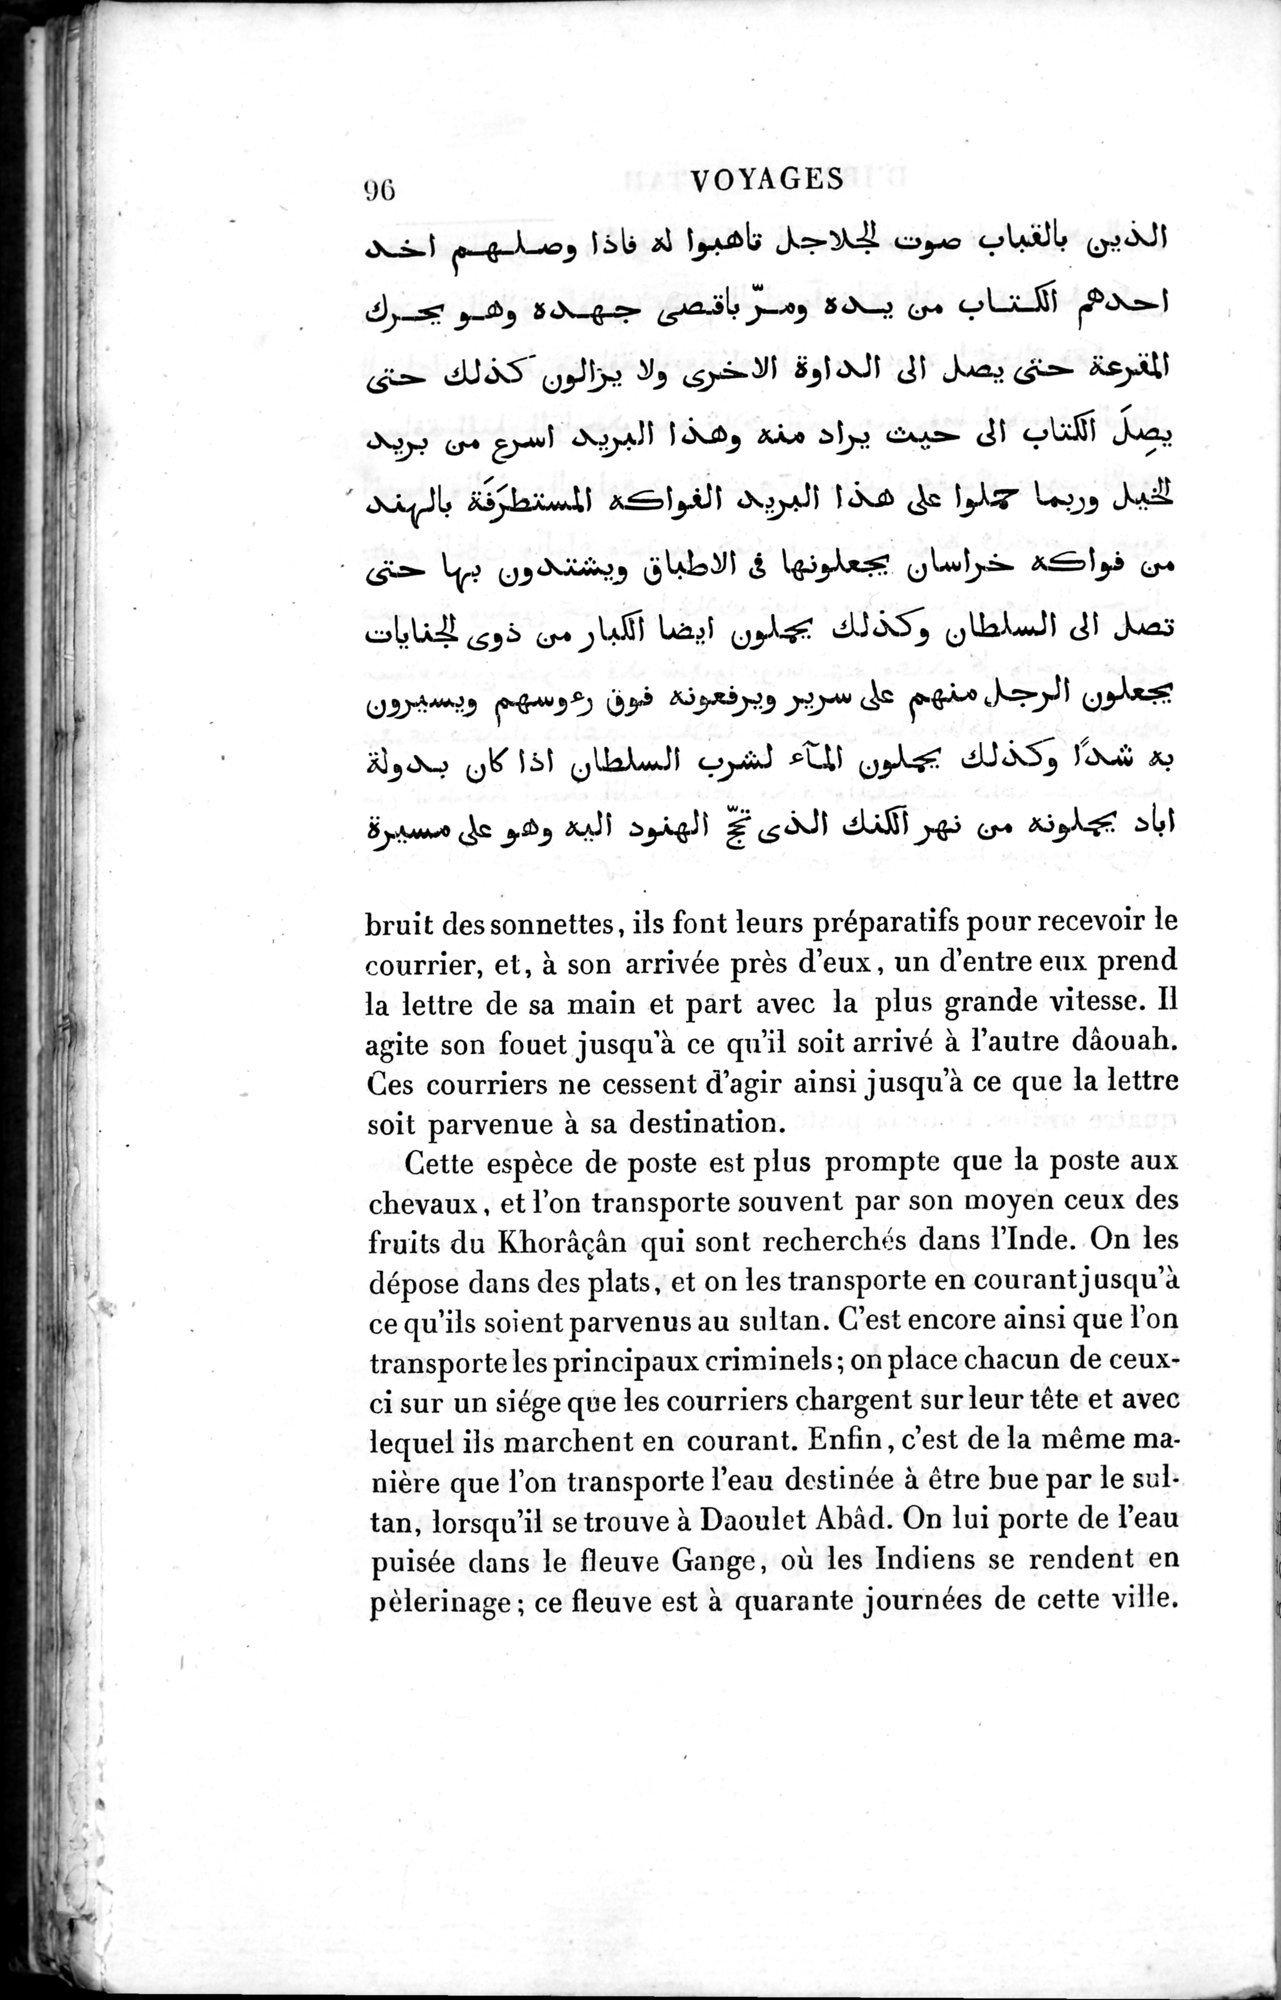 Voyages d'Ibn Batoutah : vol.3 / Page 136 (Grayscale High Resolution Image)